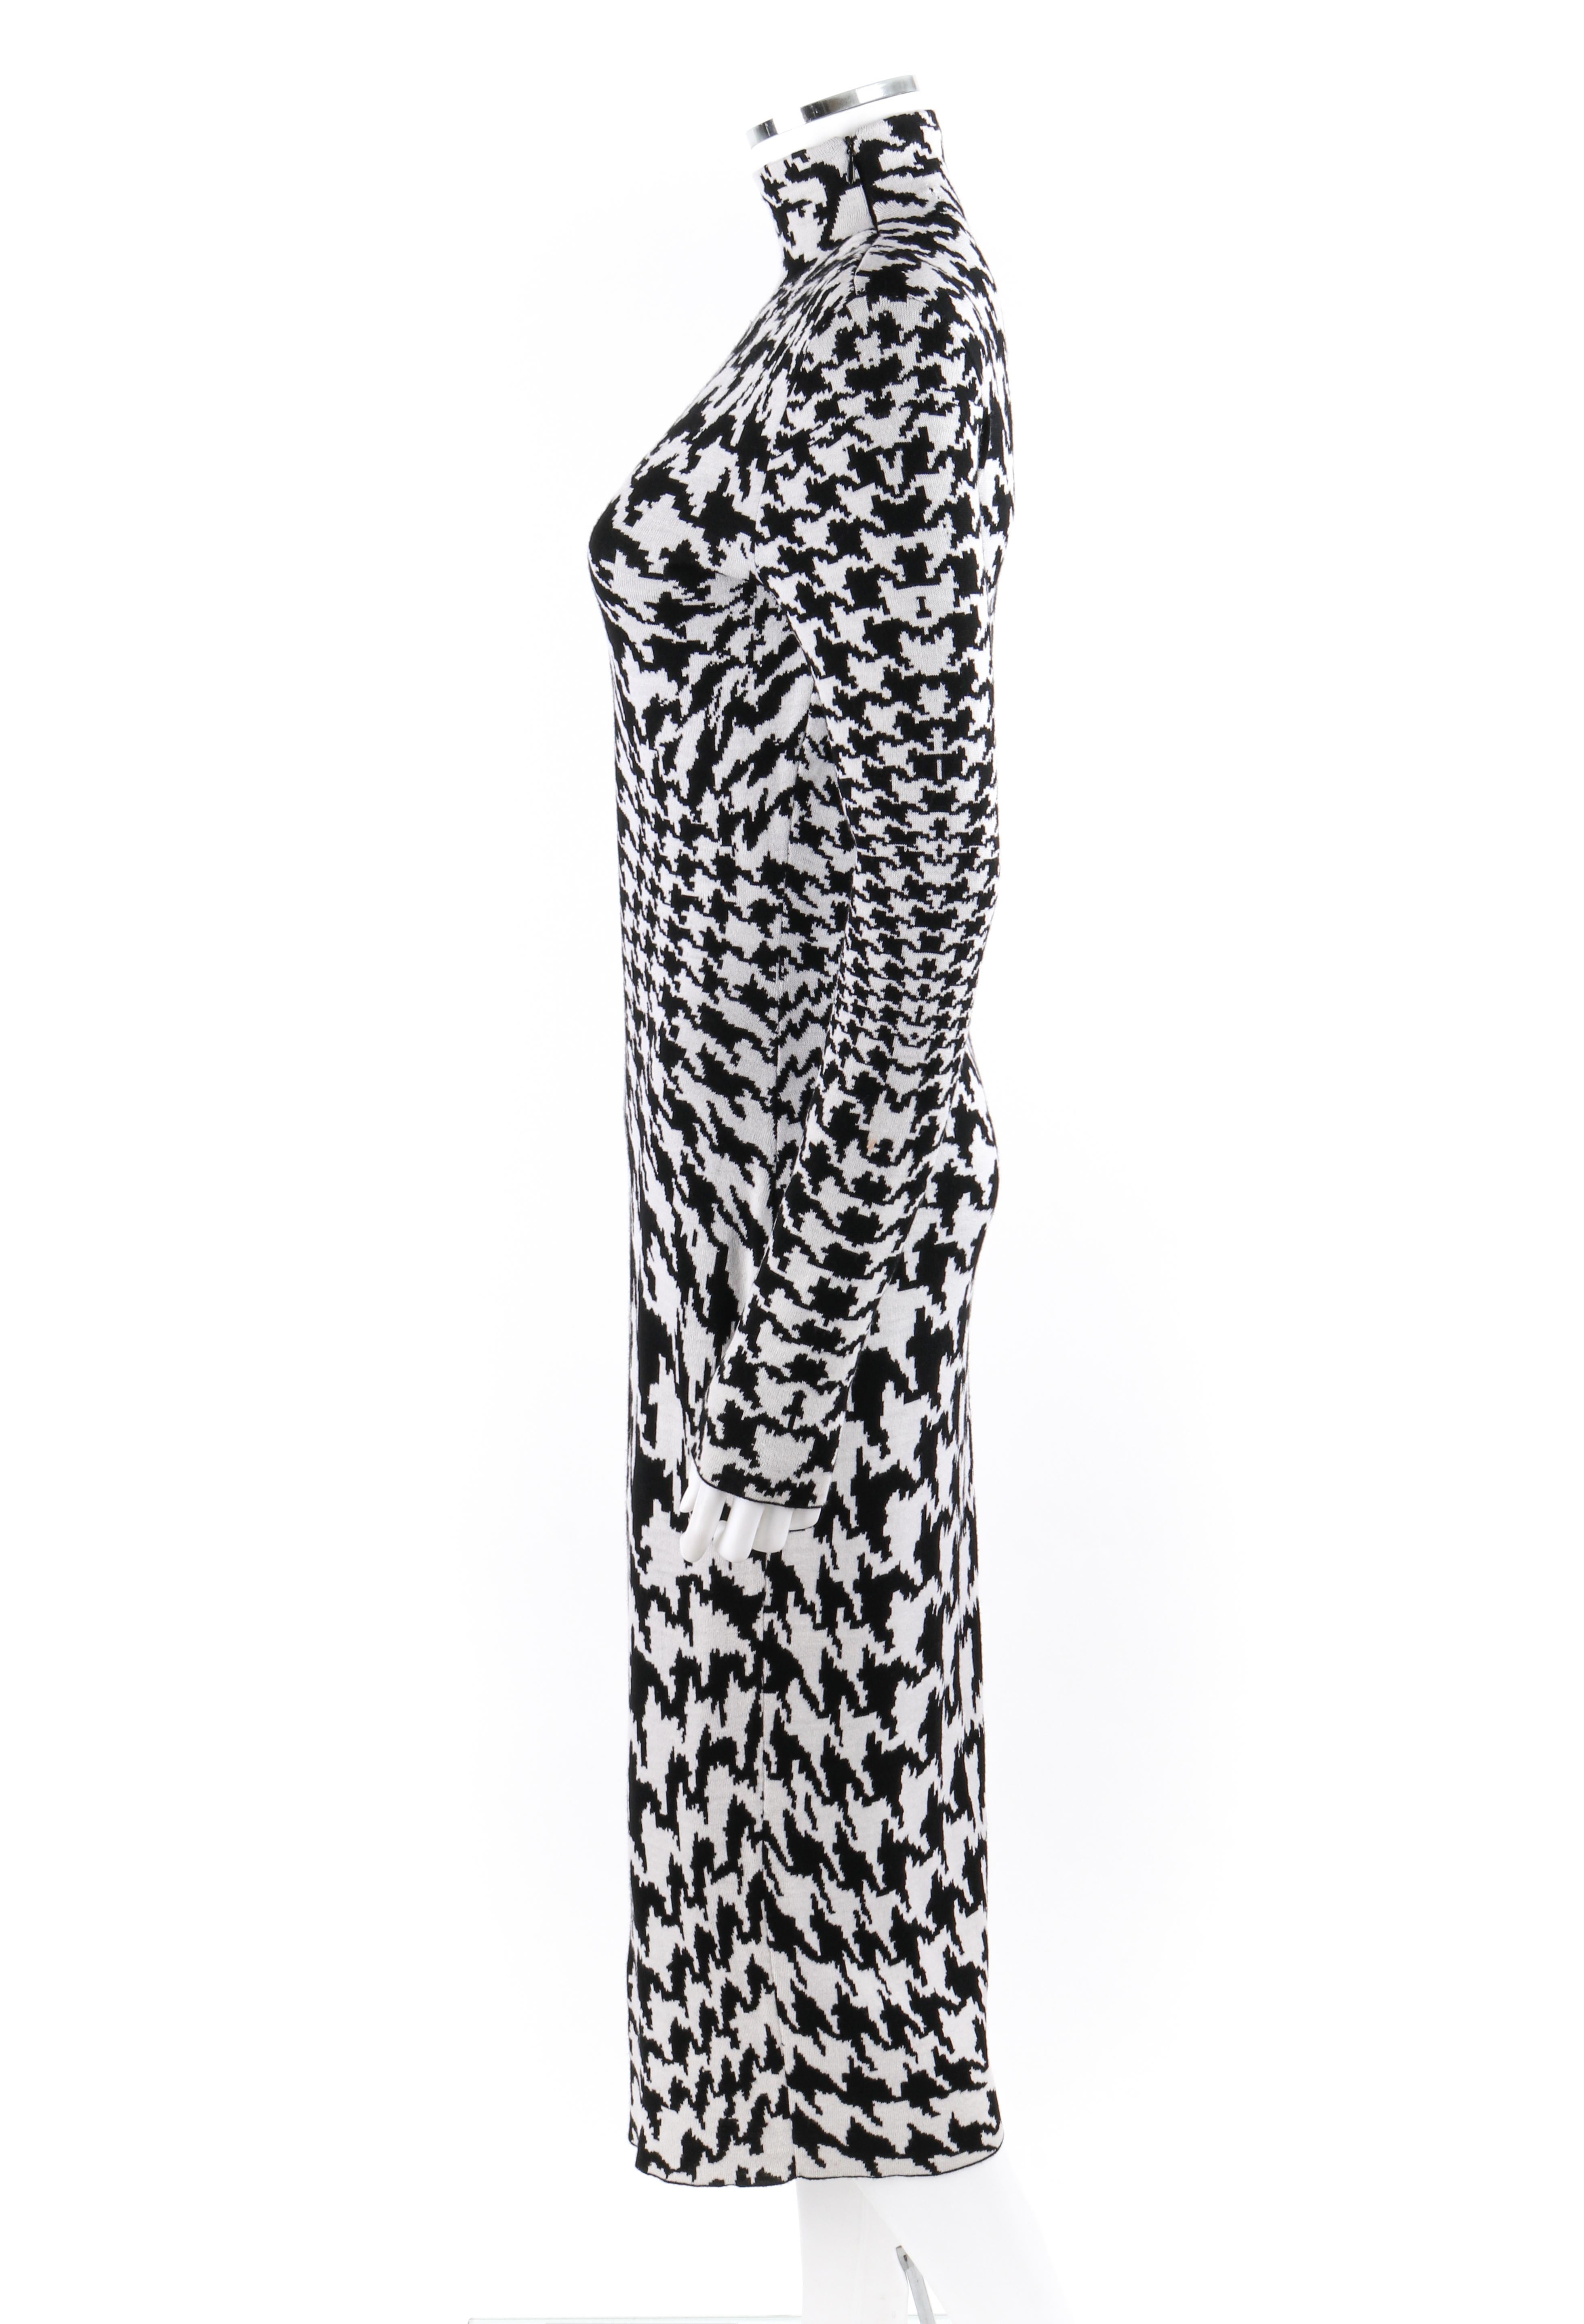 Black ALEXANDER McQUEEN A/W 2009 “The Horn Of Plenty” Houndstooth Knit Sheath Dress For Sale